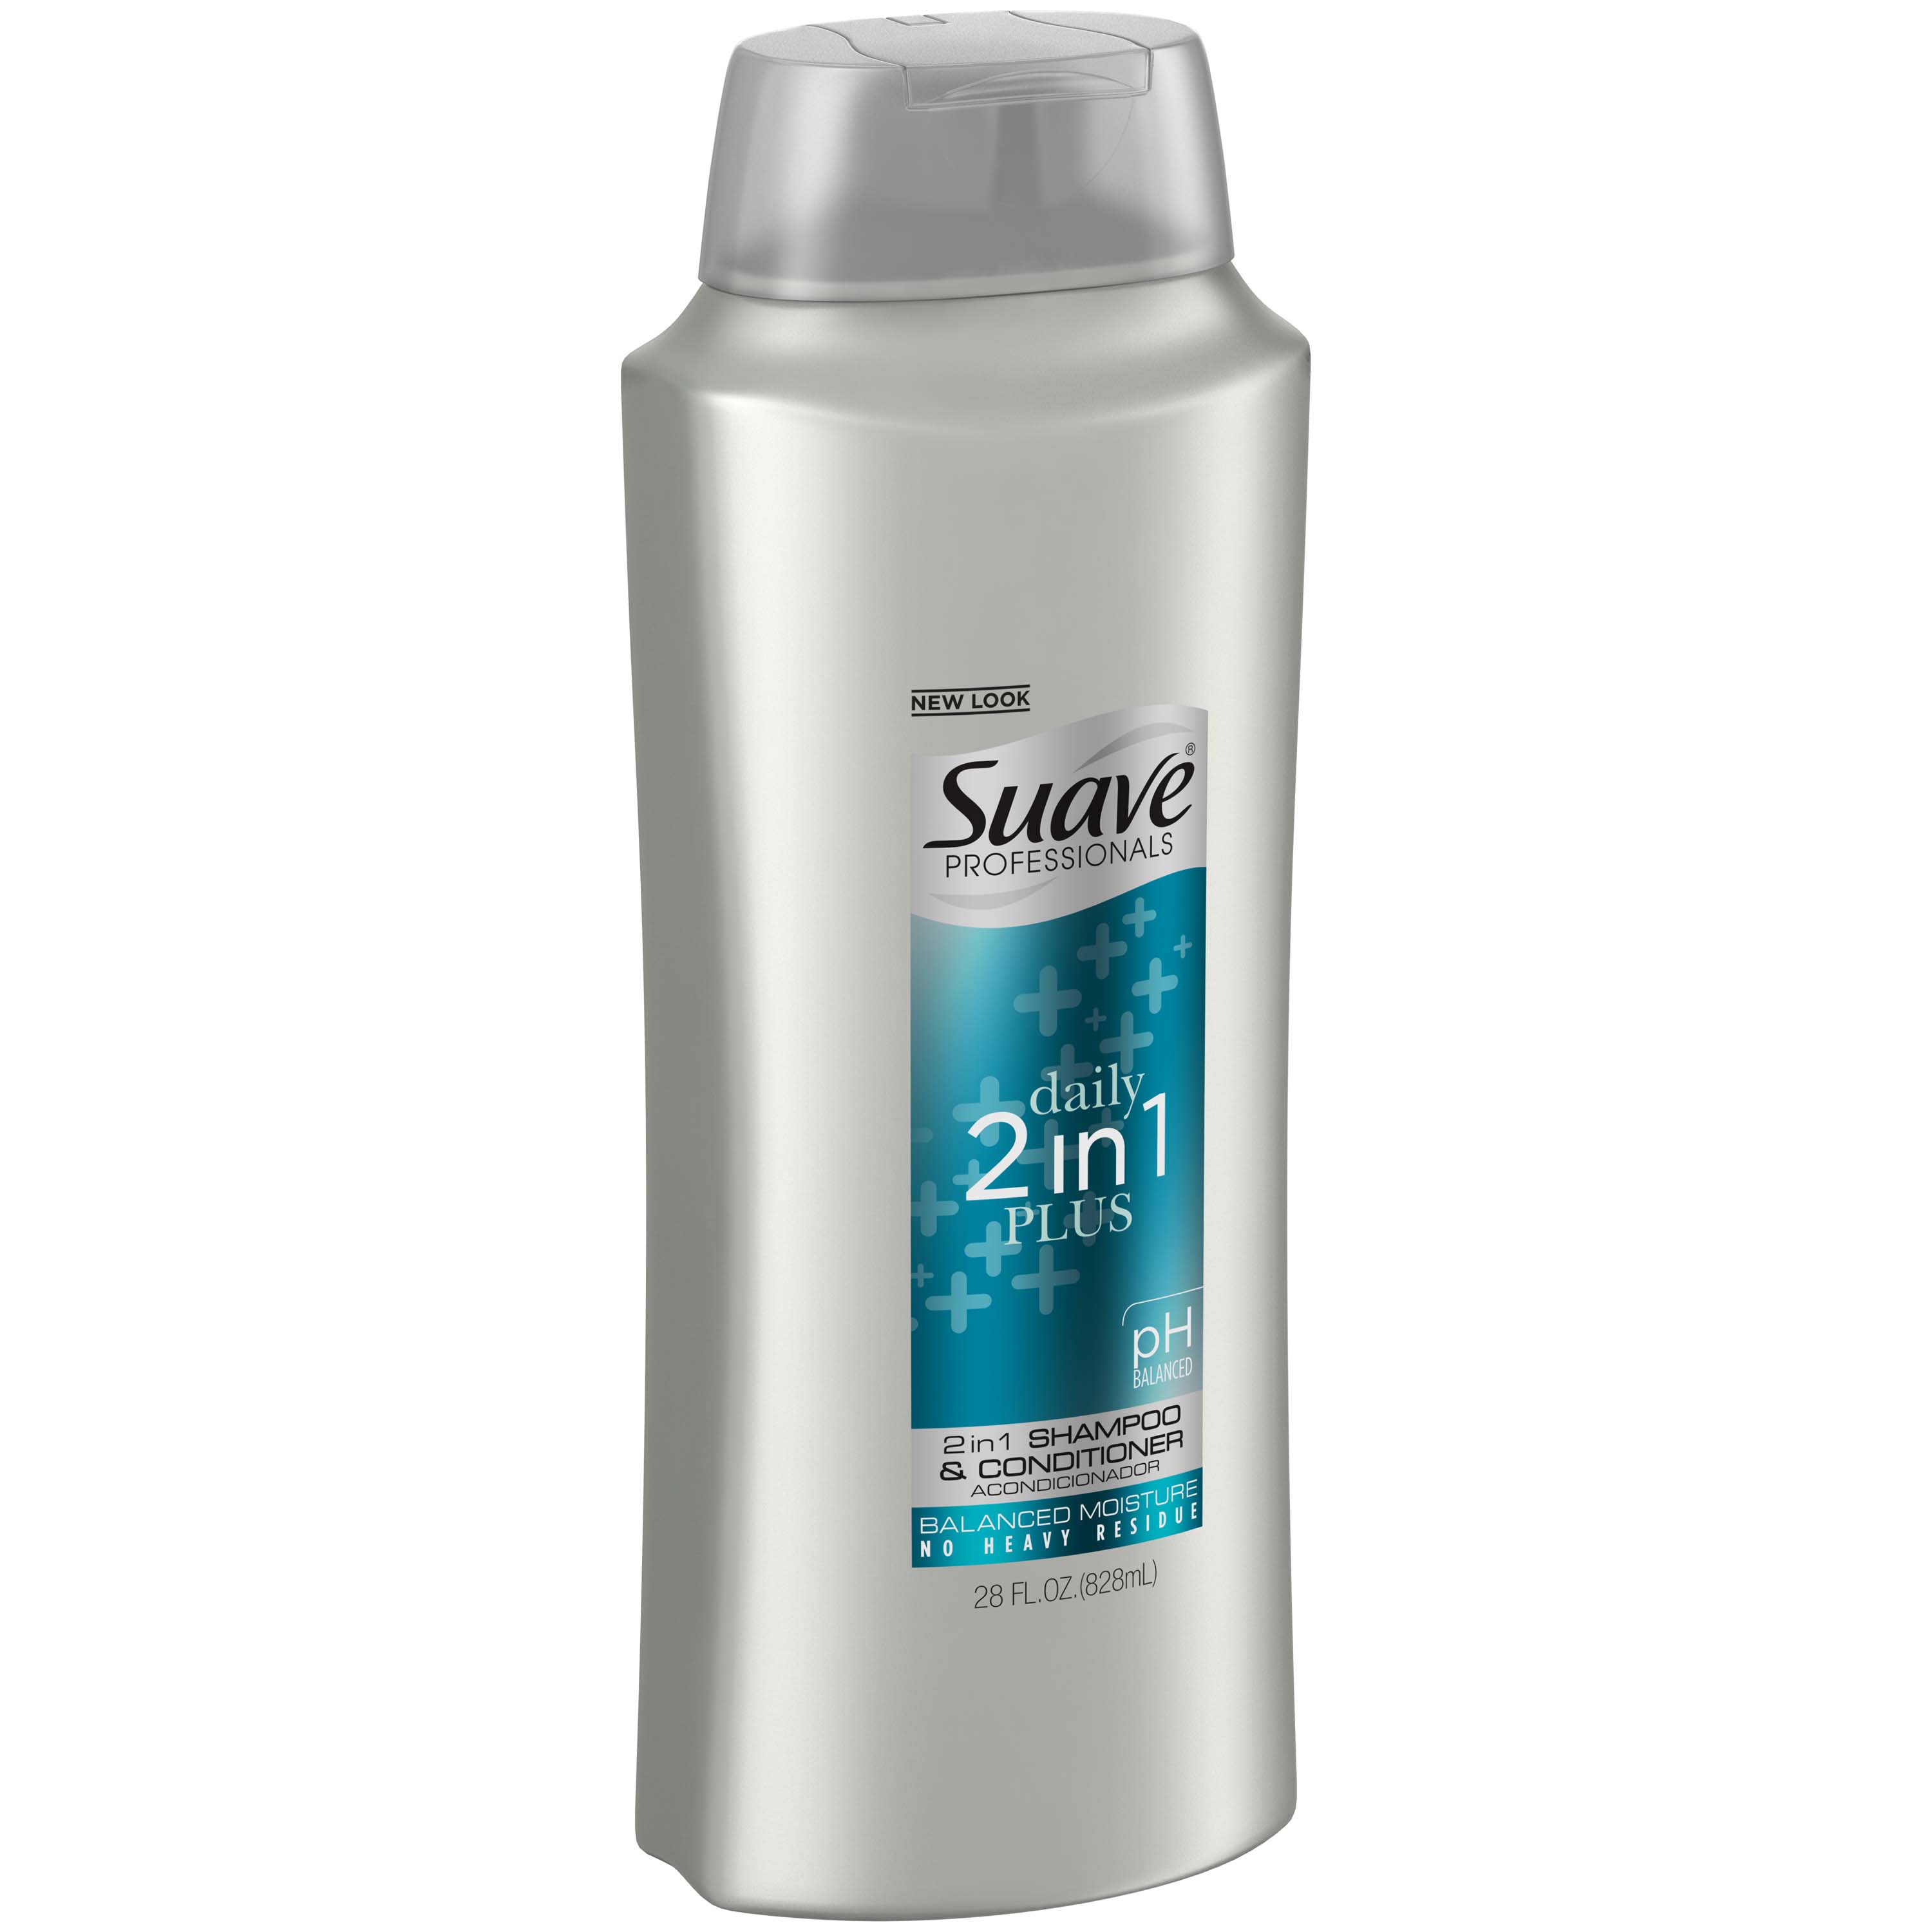 Suave Professionals Clarifying Moisturizing Daily Plus 2 in 1 Shampoo and Conditioner, 28 fl oz - image 5 of 10